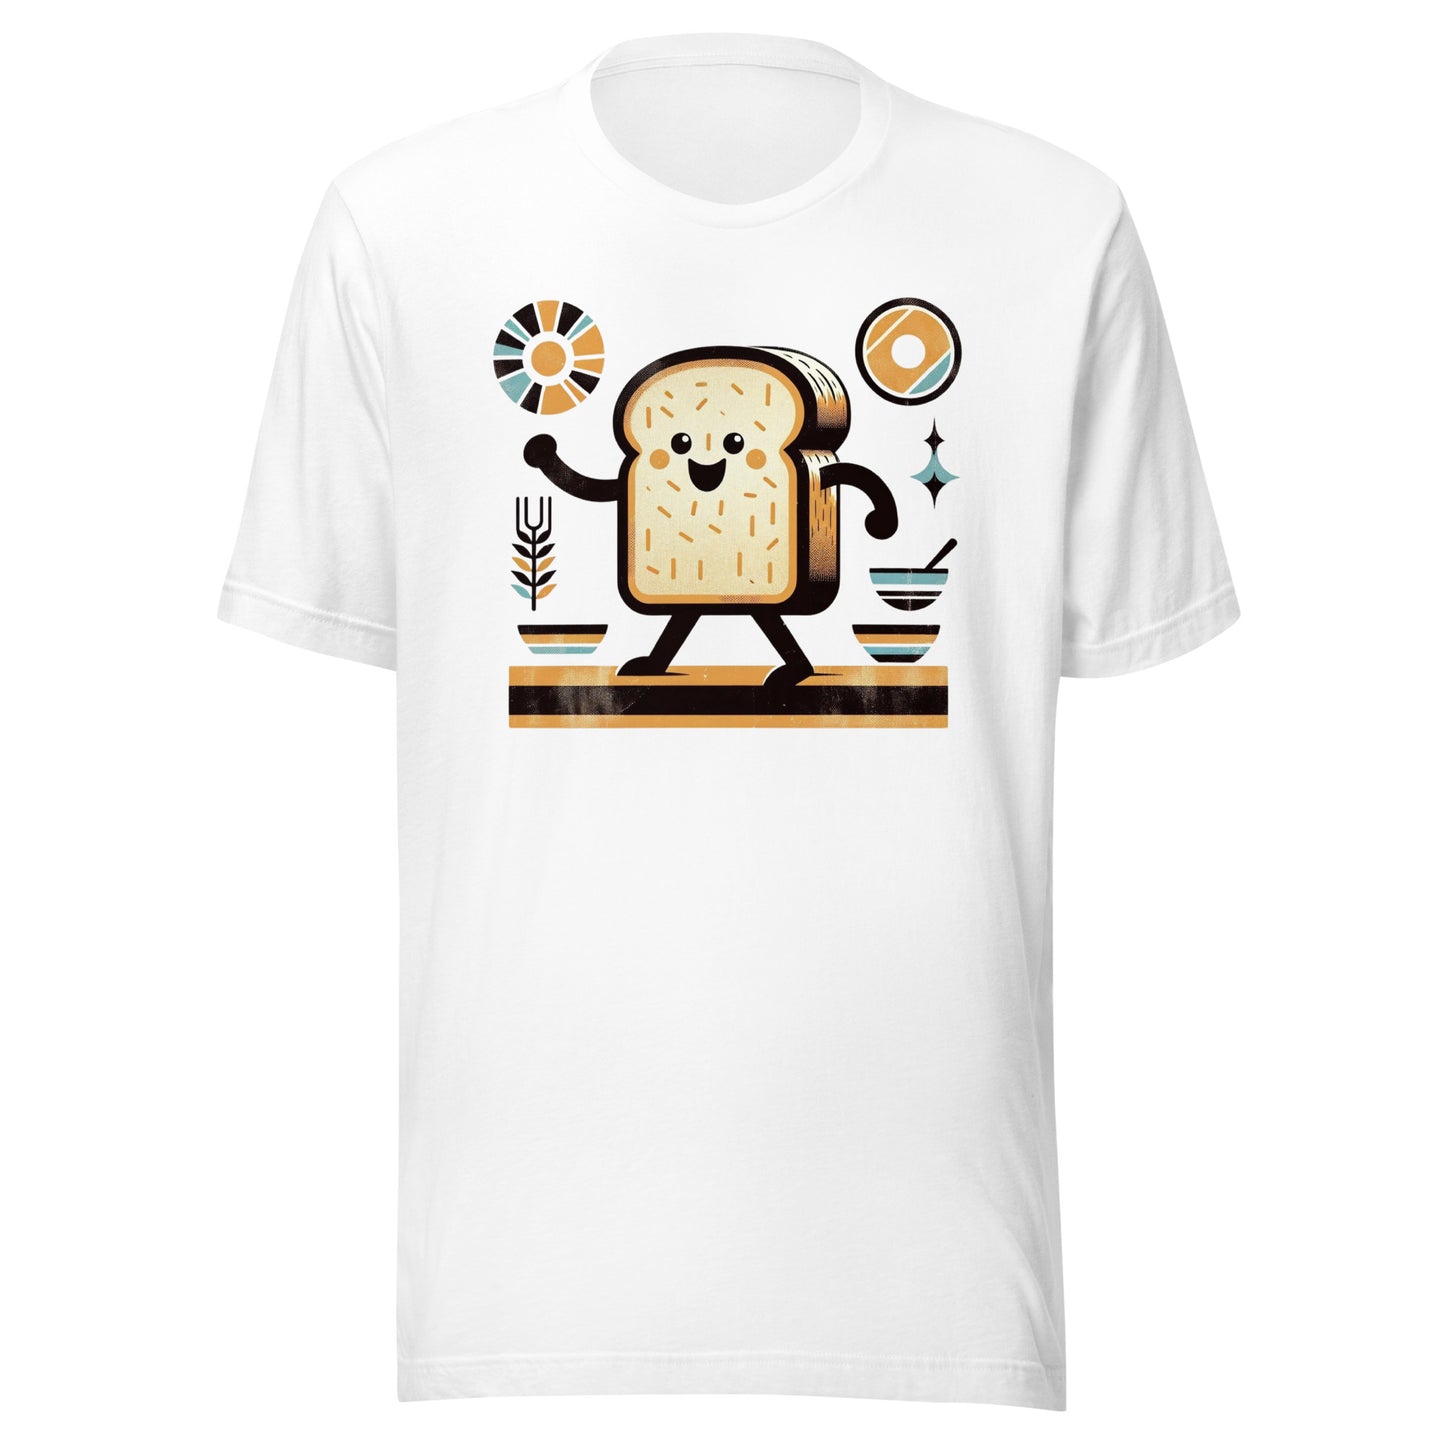 A Toast to Morning Vibes - Happy Bread Unisex Tee